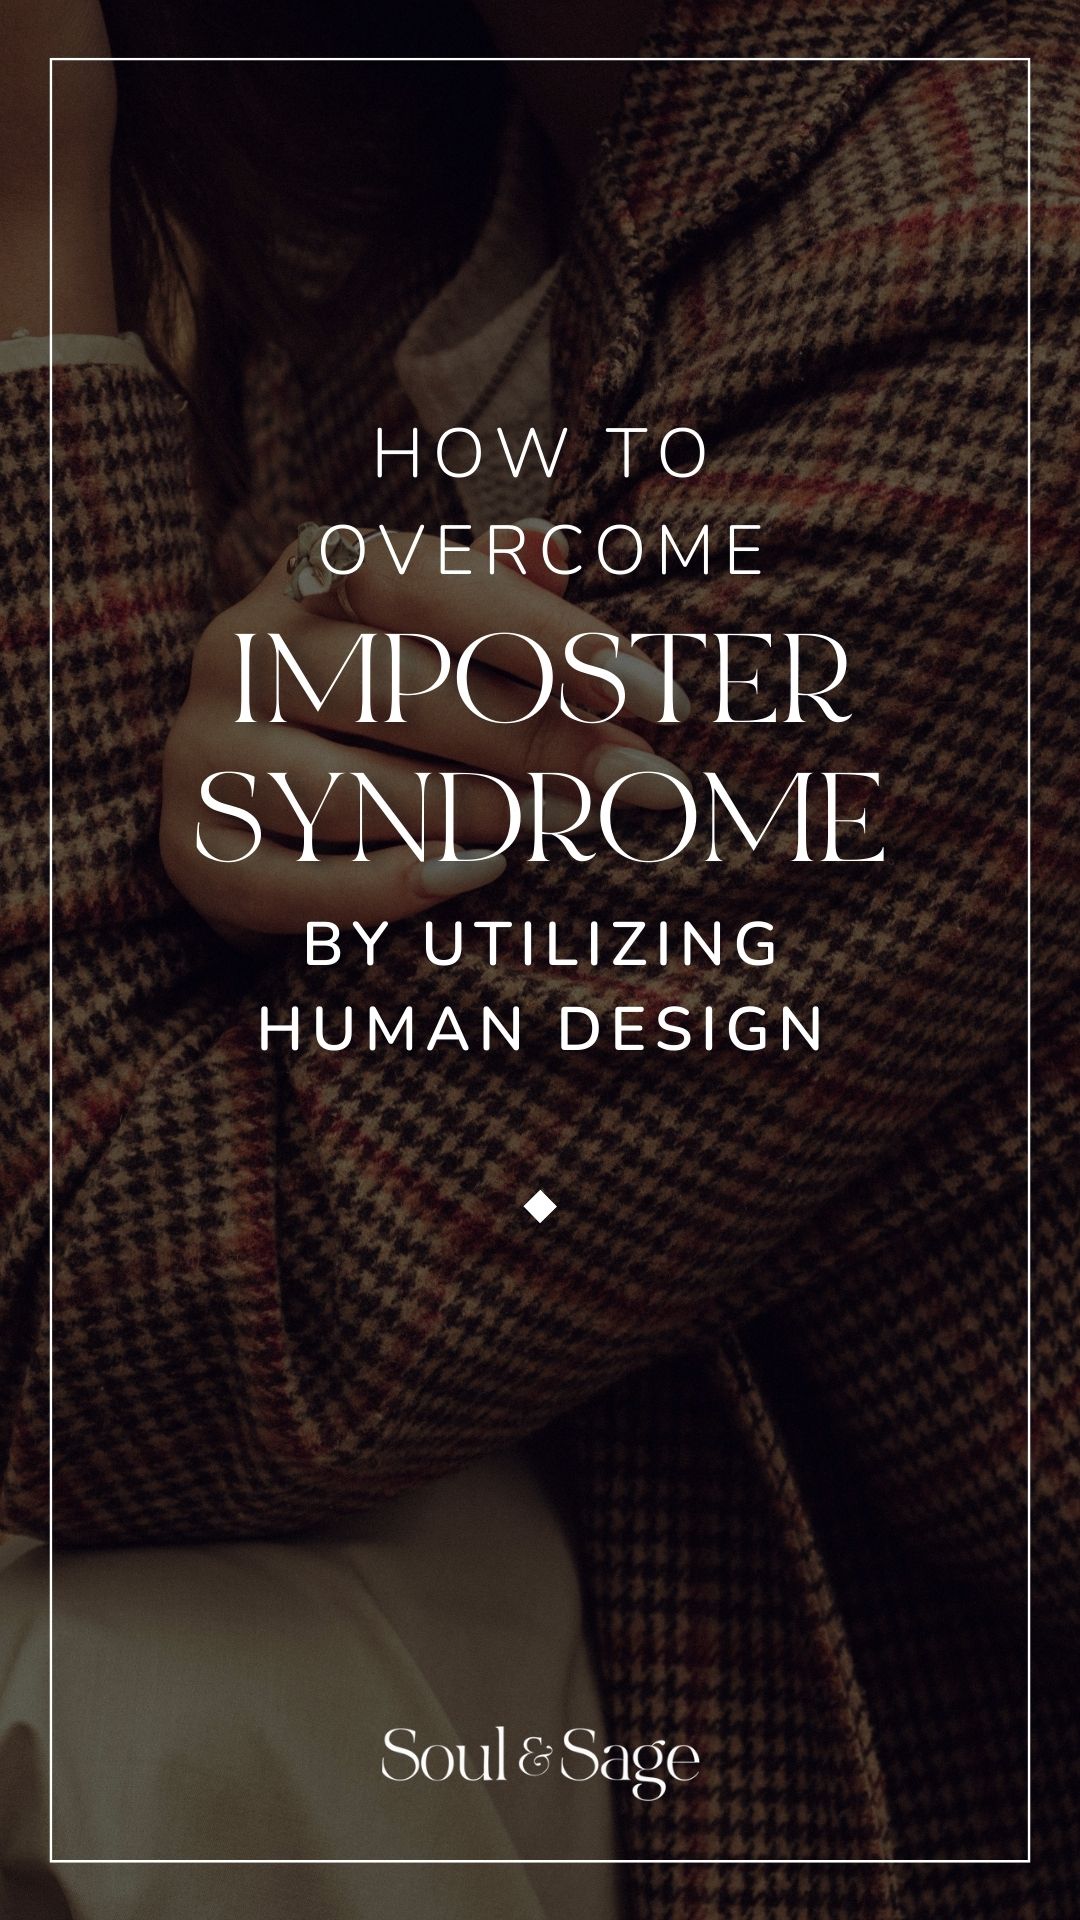 How to Overcome Imposter Syndrome by Utilizing Human Design